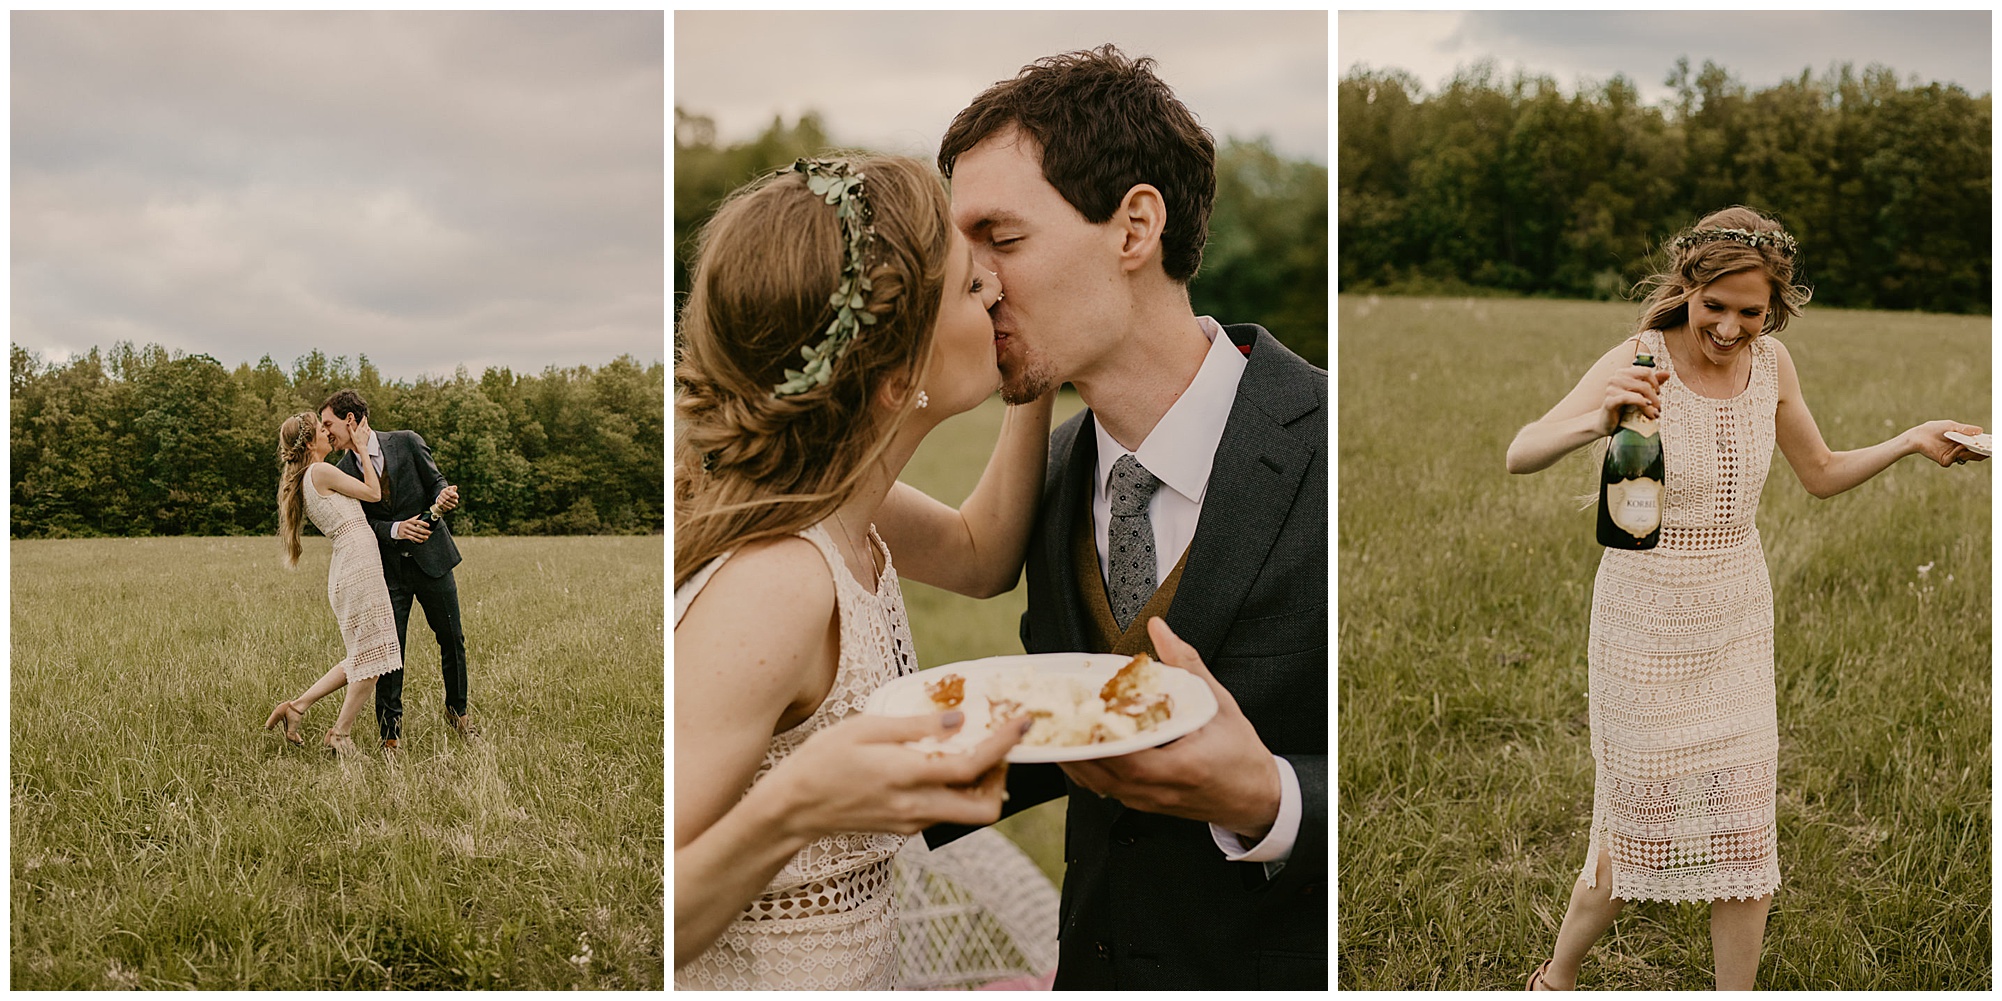 chic boho style wedding and carefree elopement inspo at prancing deer farm now featured on my eastern shore wedding blog